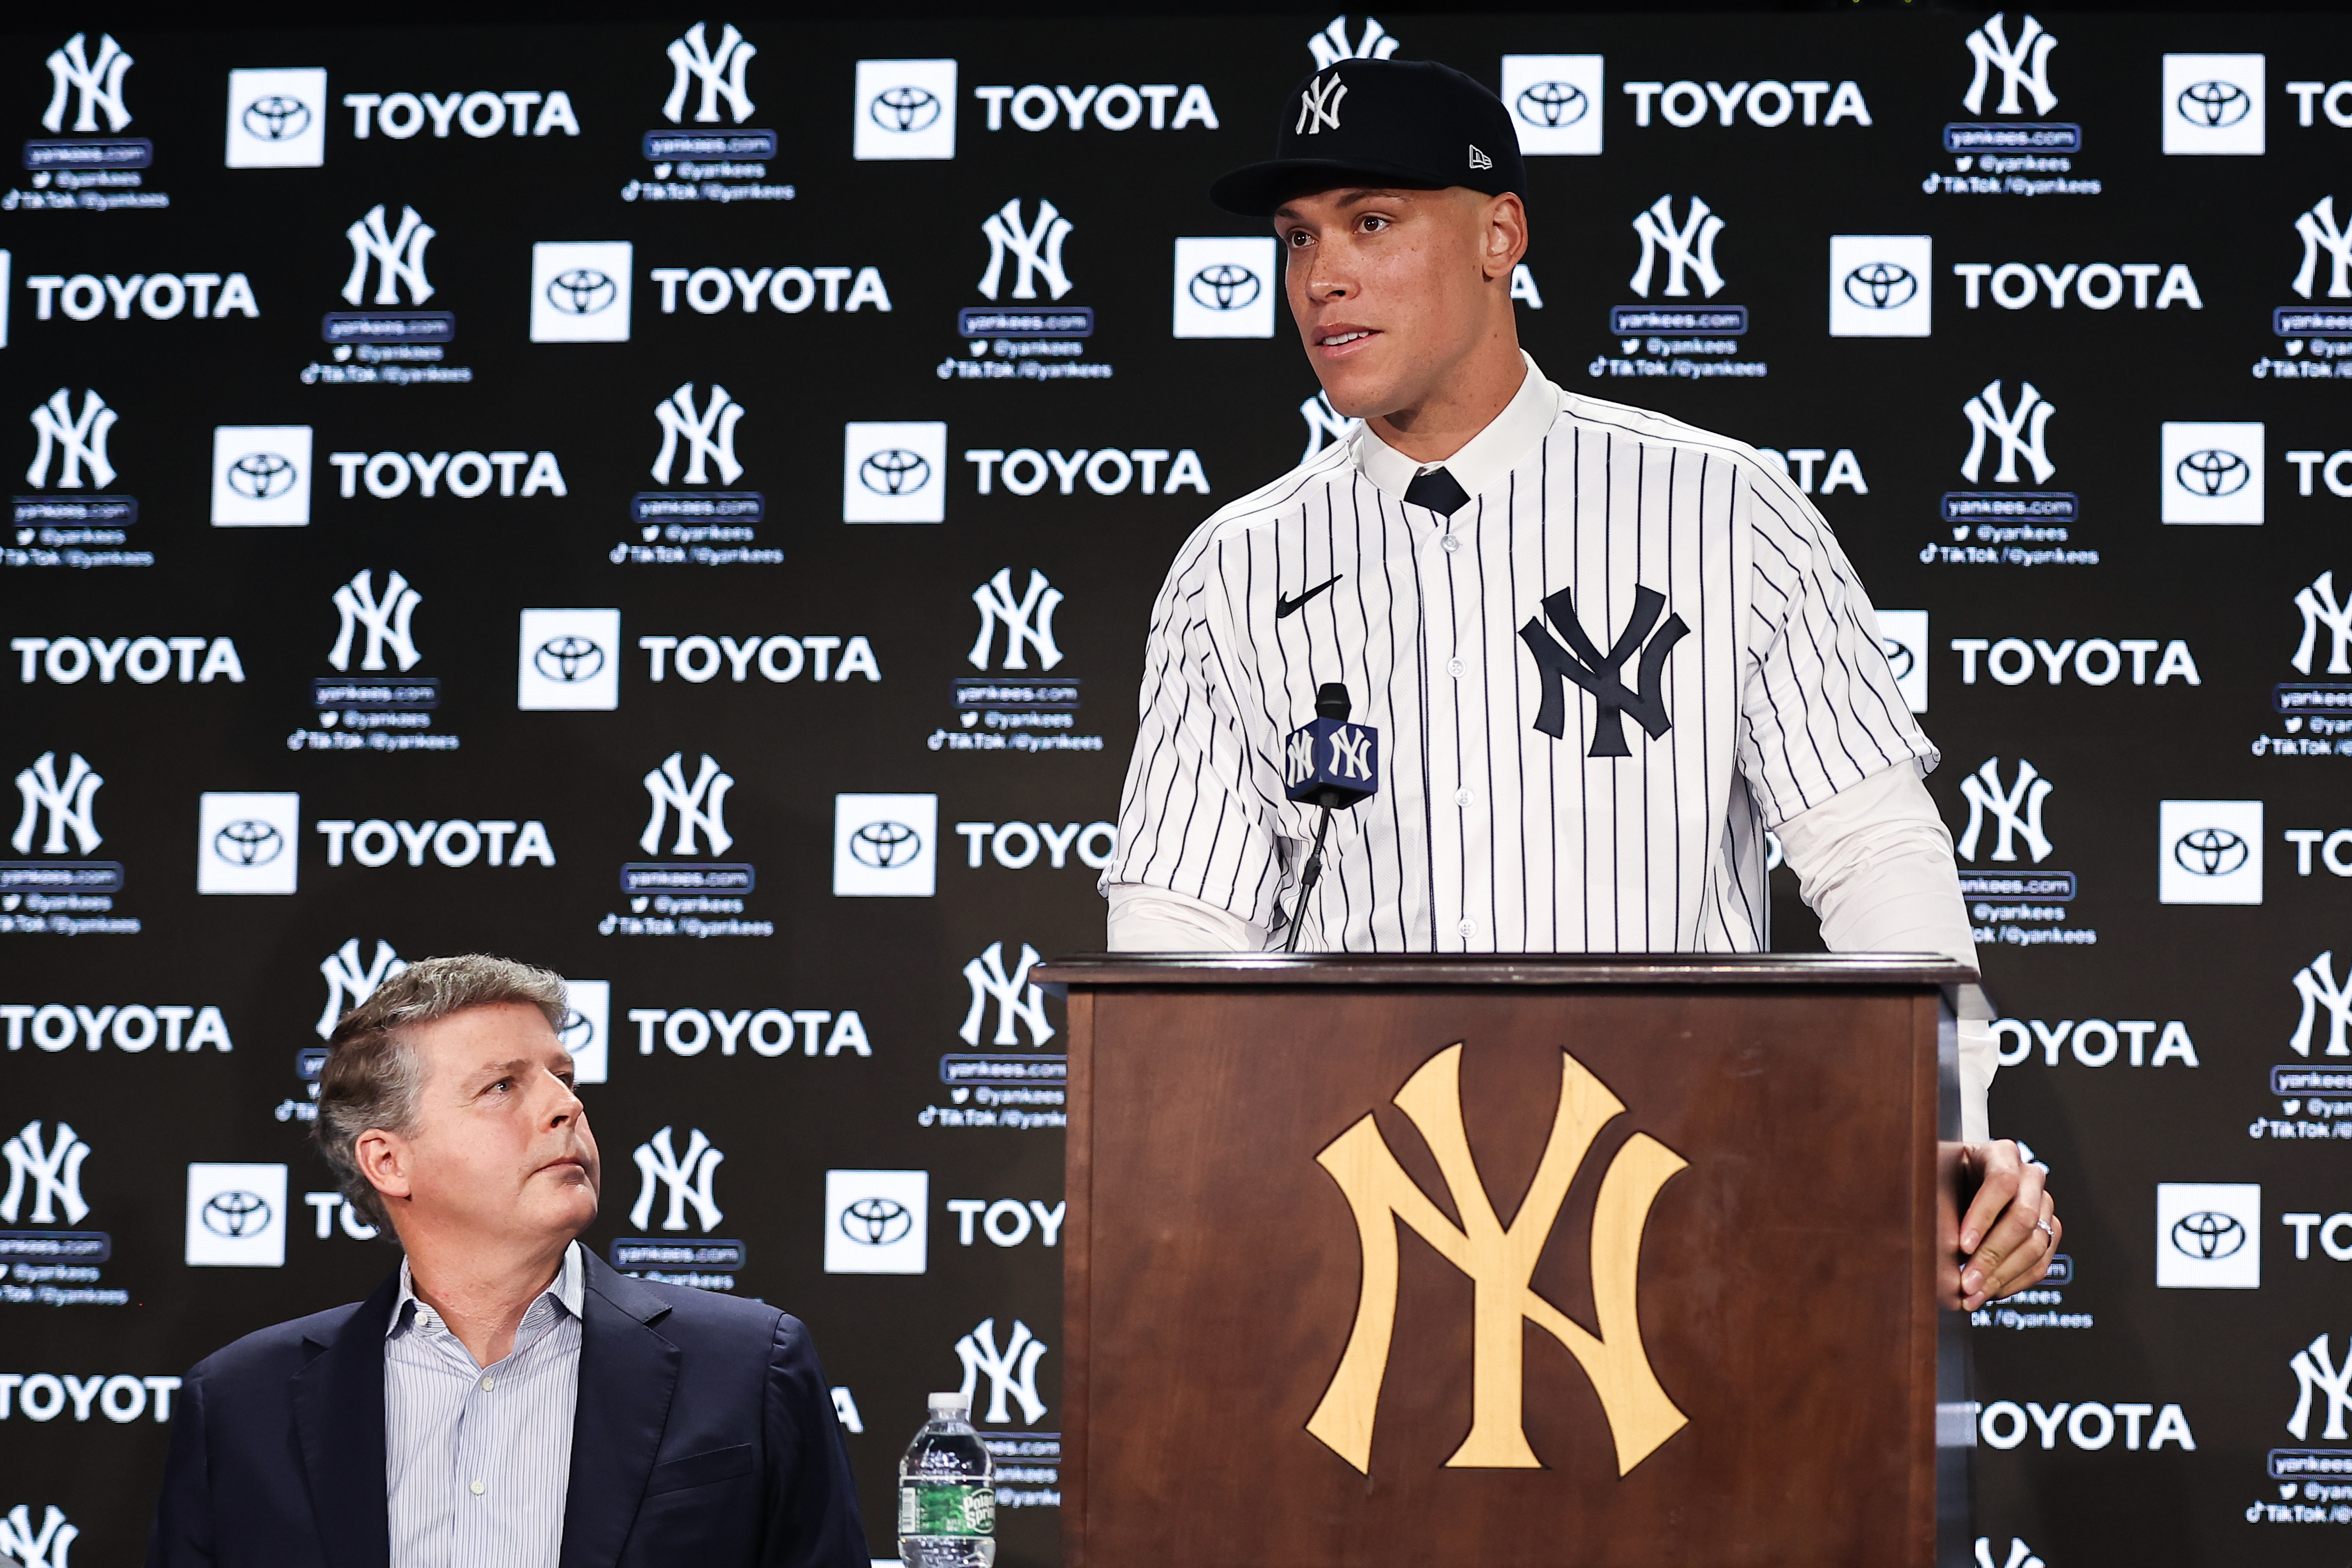 New York Yankees: Aaron Judge is their new captain